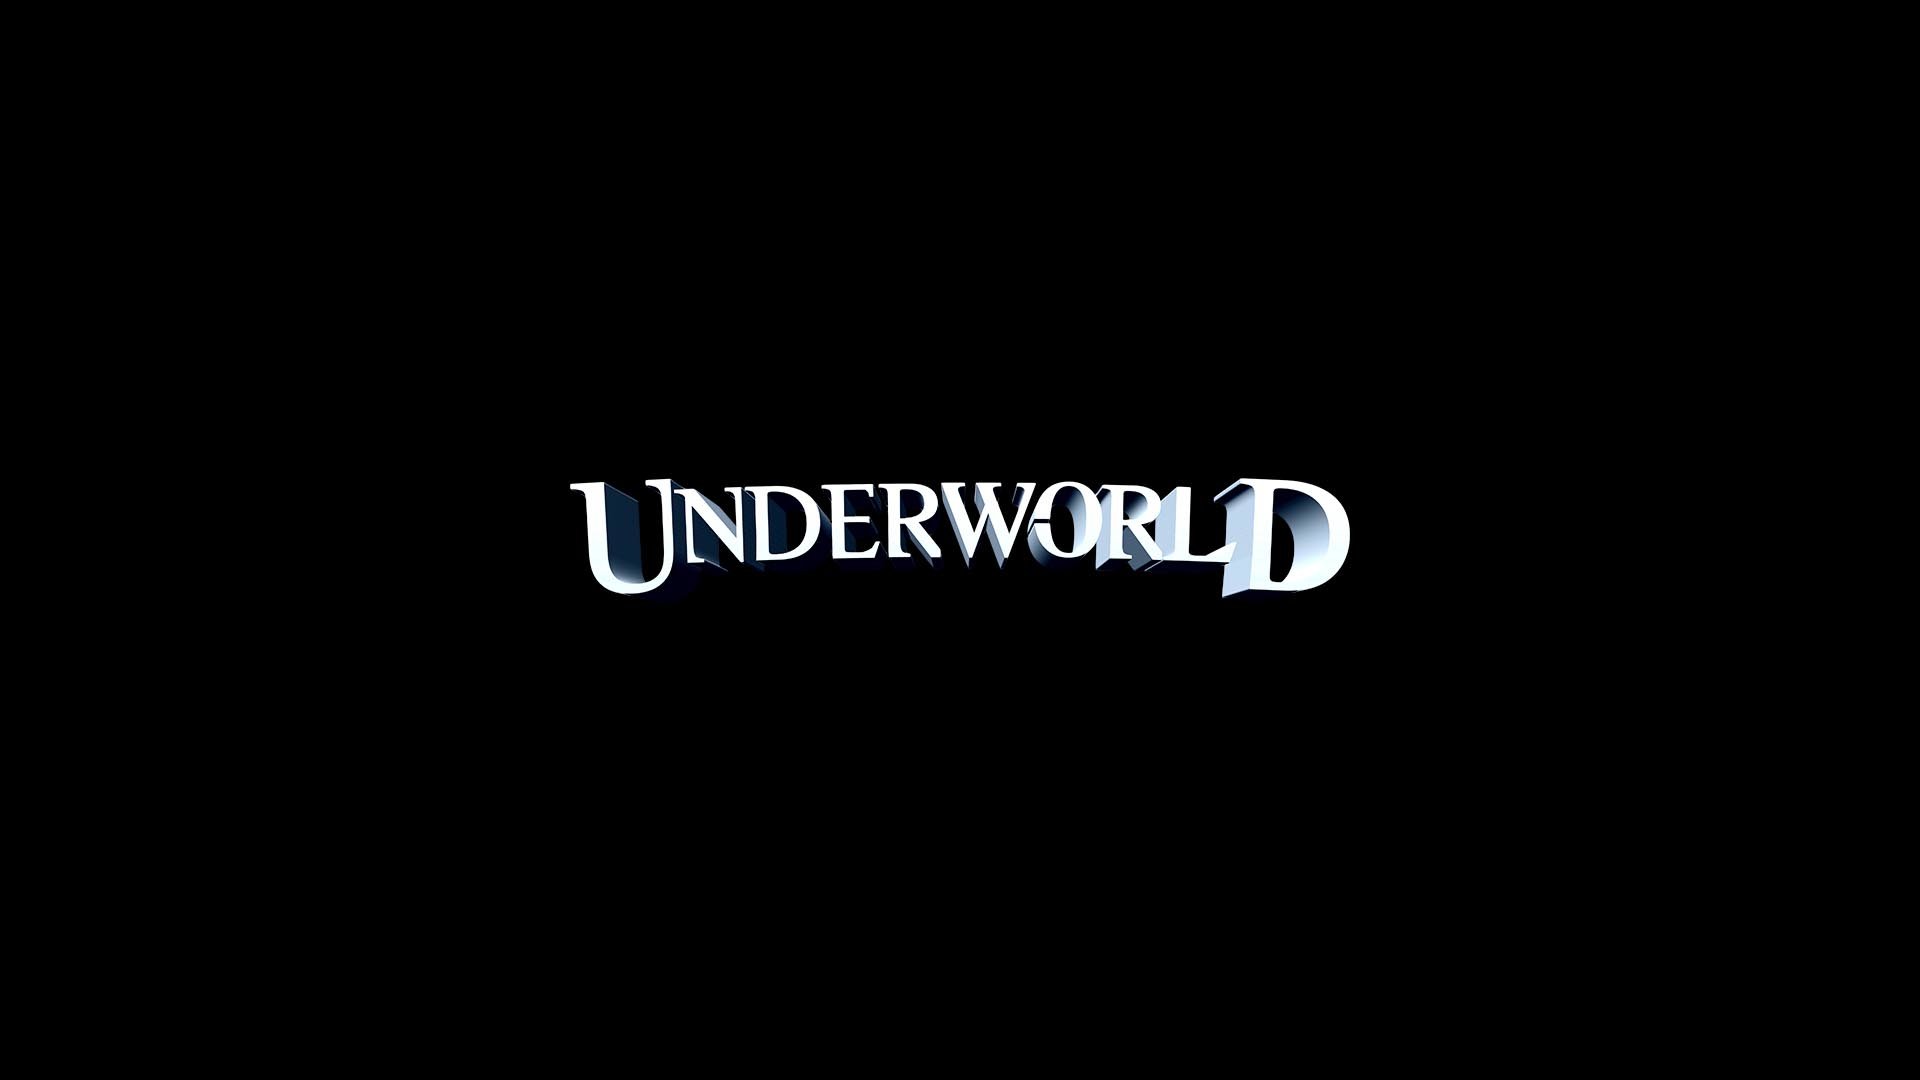 Awesome Underworld free wallpaper ID:419391 for hd 1920x1080 PC